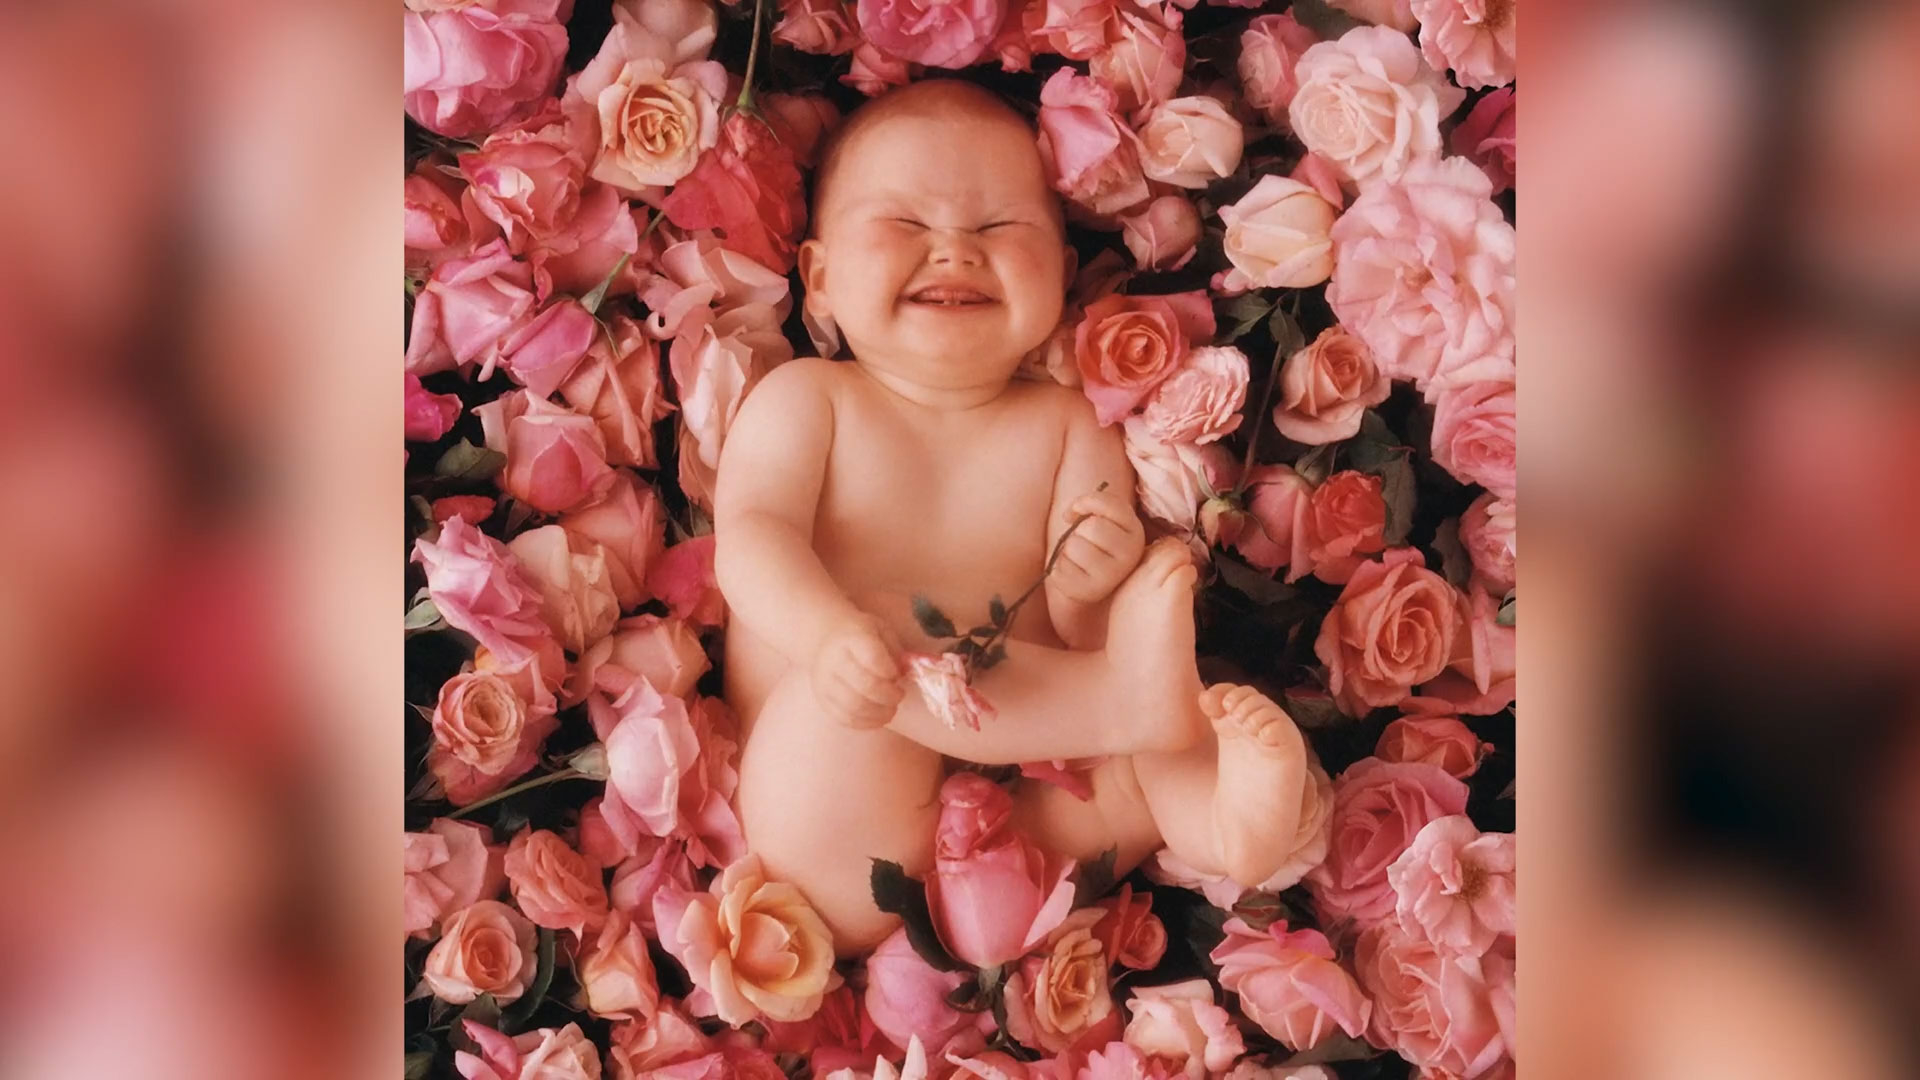 Anne Geddes is auctioning off one private shoot to take place in her New York studio, to raise money for mothers and children in Ukraine.